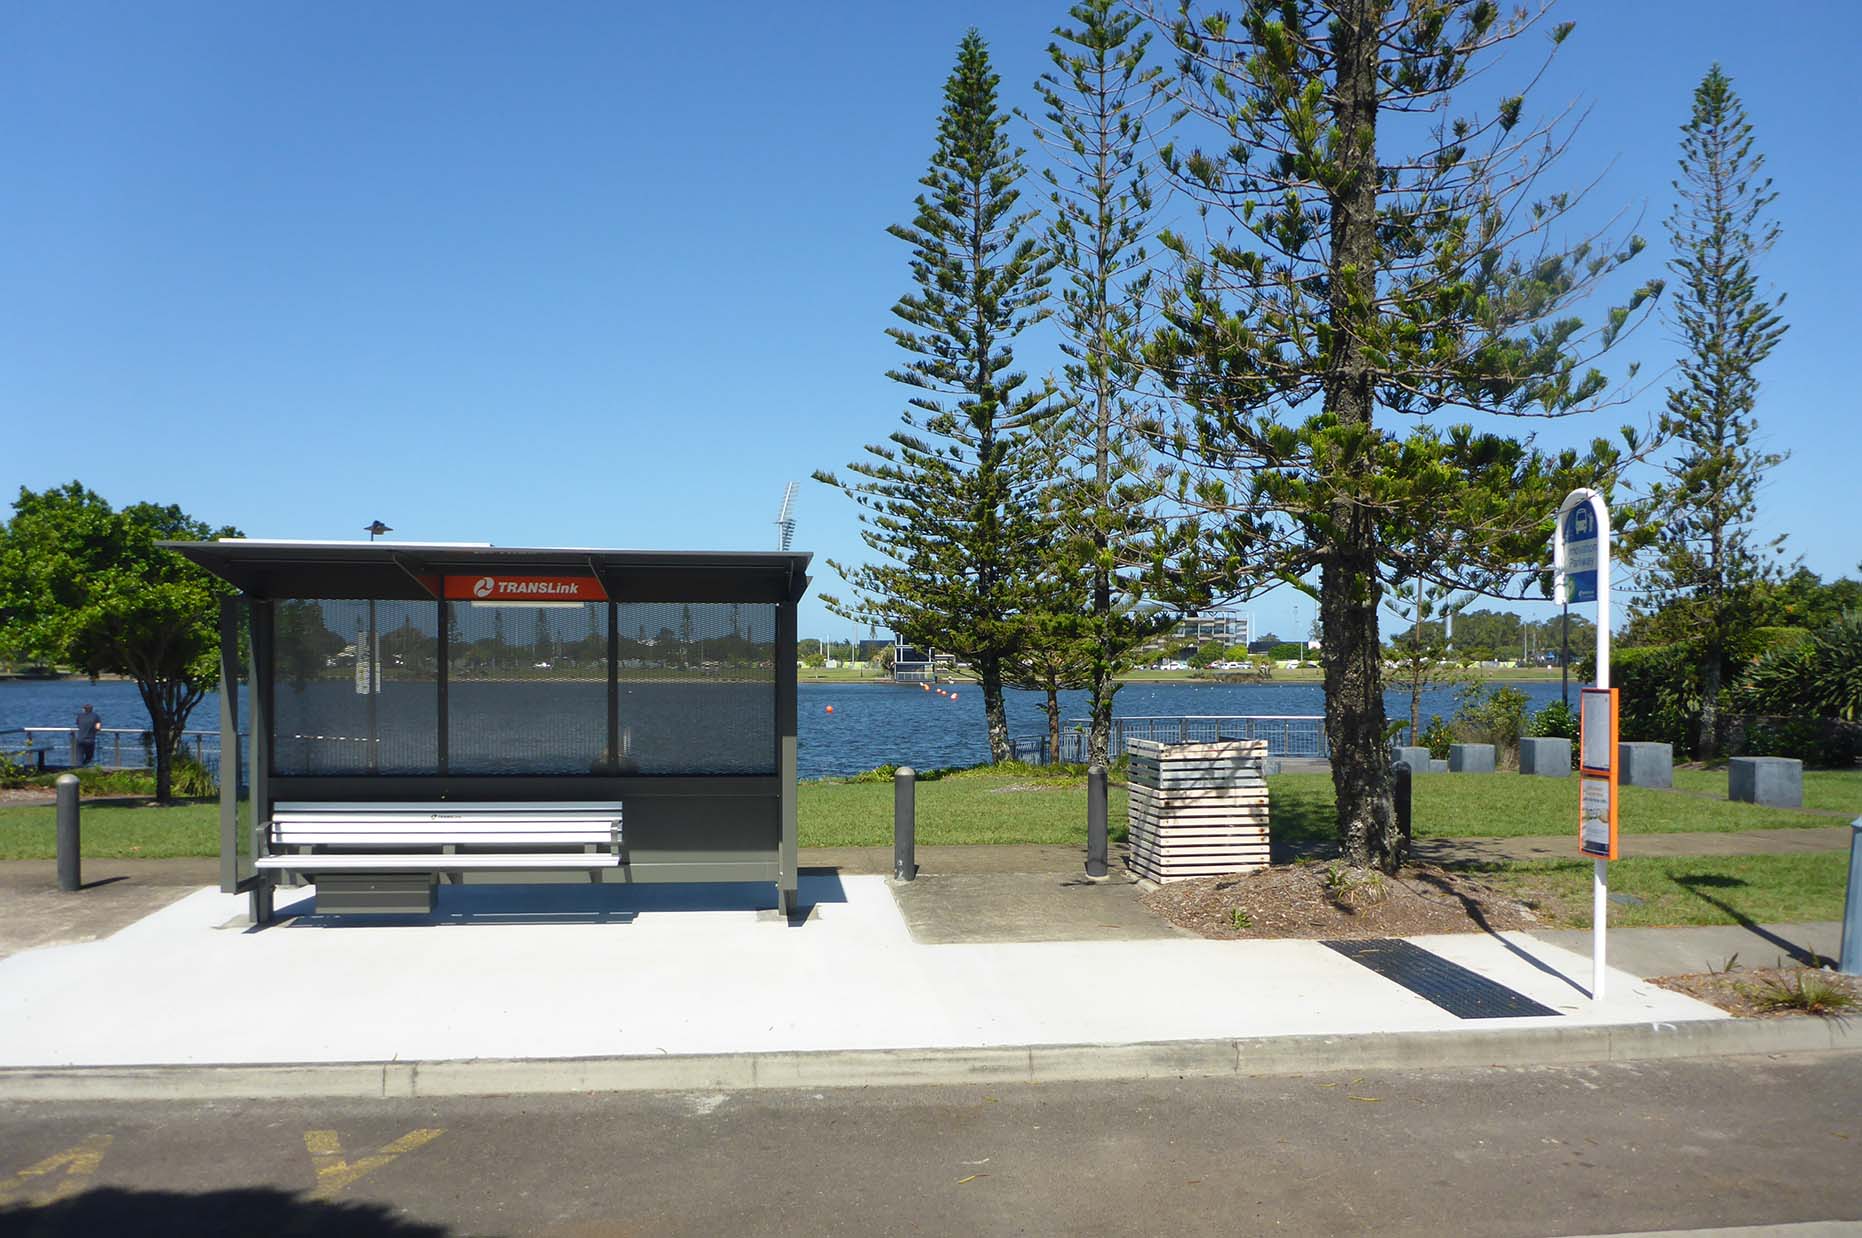 image of a bus stop and a bus shelter